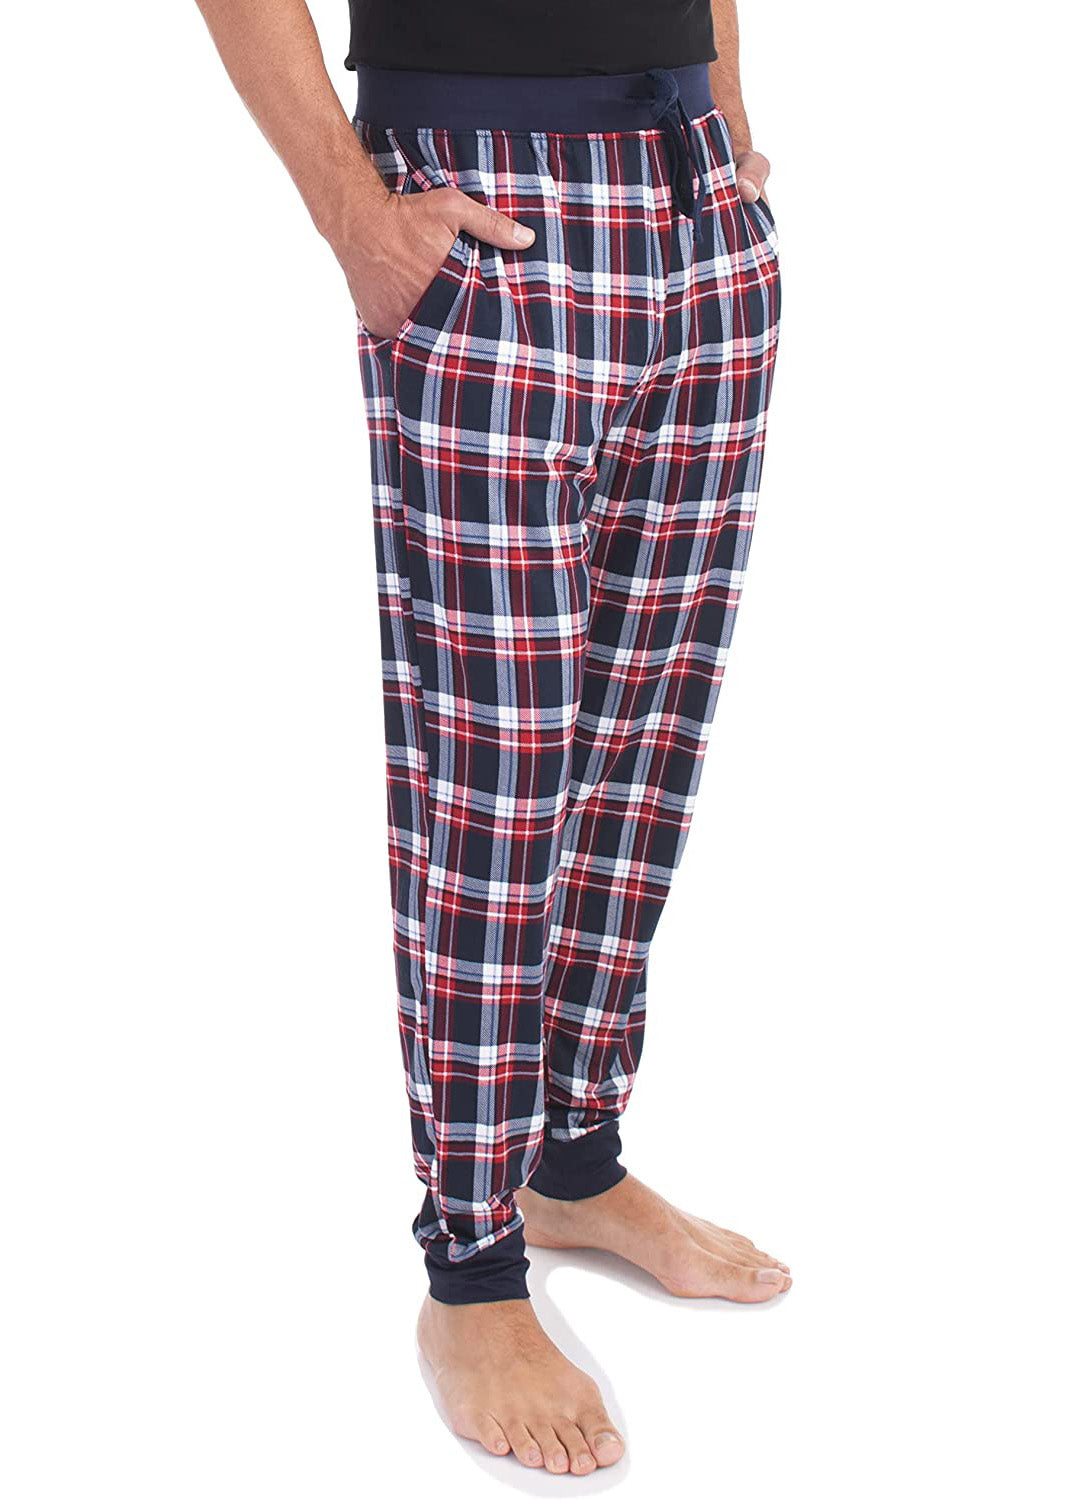 
                  
                    PJ joggers with soft velvety texture, stretch, elastic waistband, drawstring, and stylish ankle cuff. This pattern is a red, navy, white plaid. it has navy waist and drawstring. 
                  
                